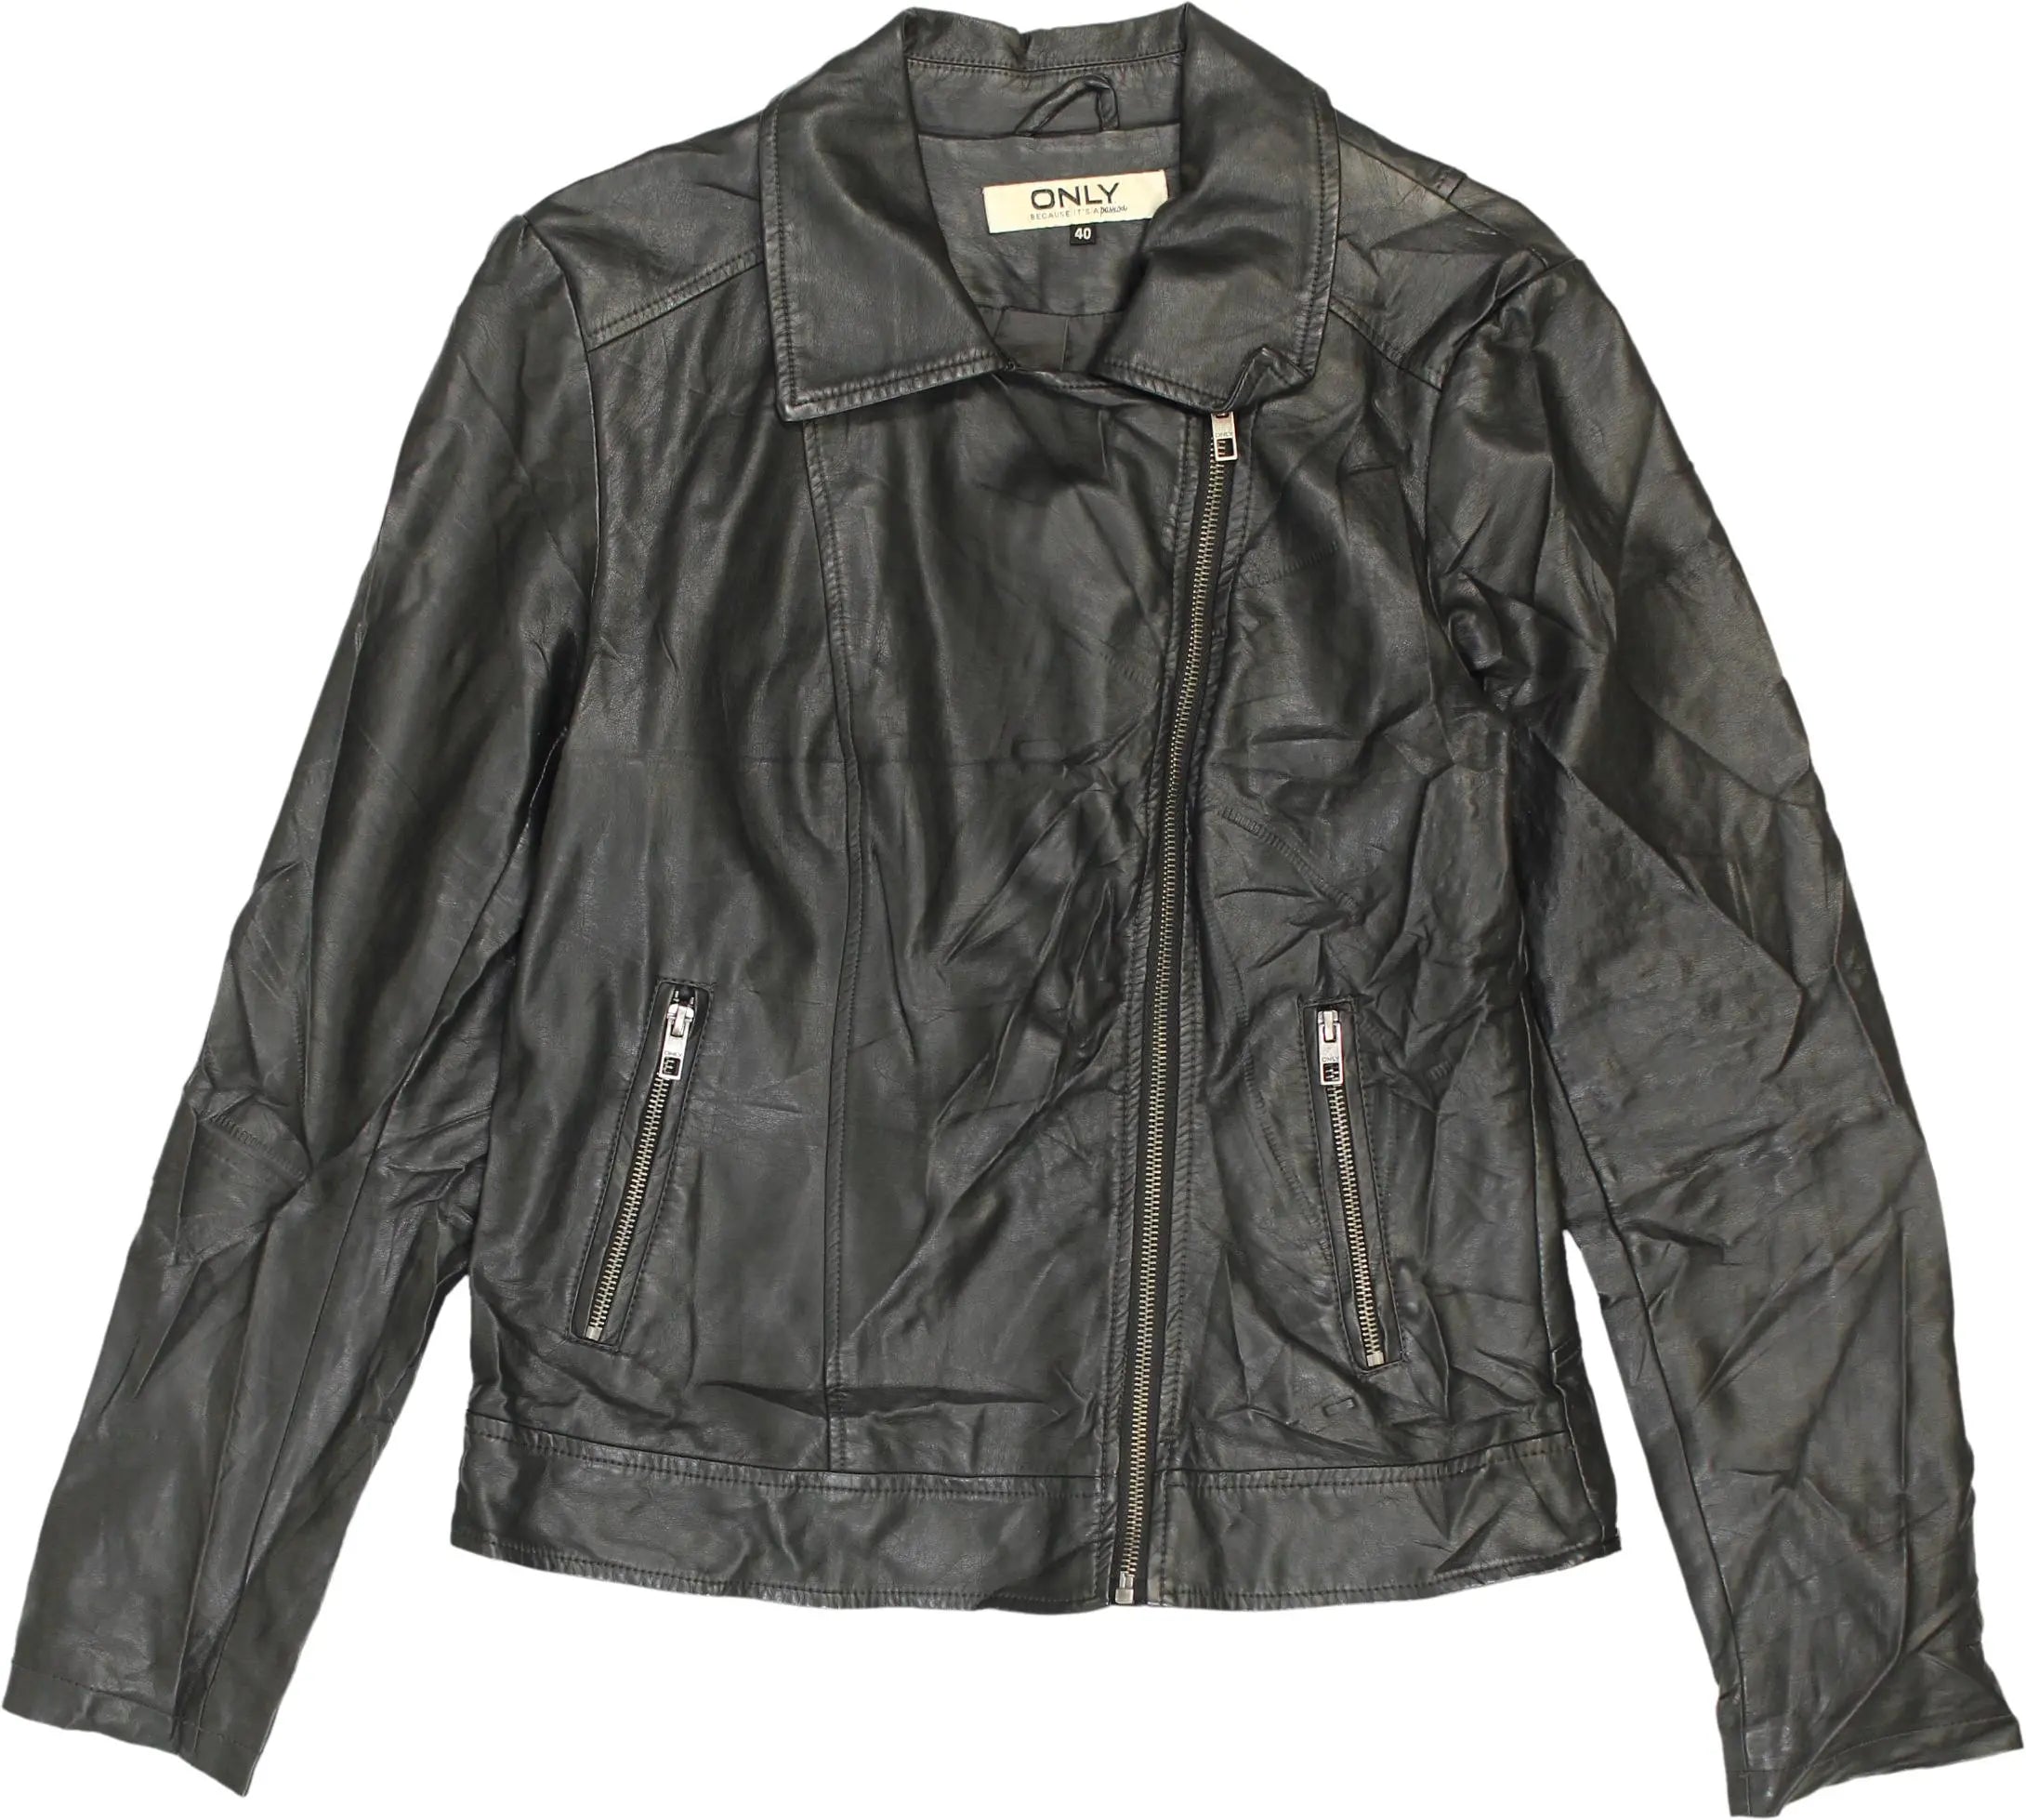 Only - Vegan Leather Jacket- ThriftTale.com - Vintage and second handclothing